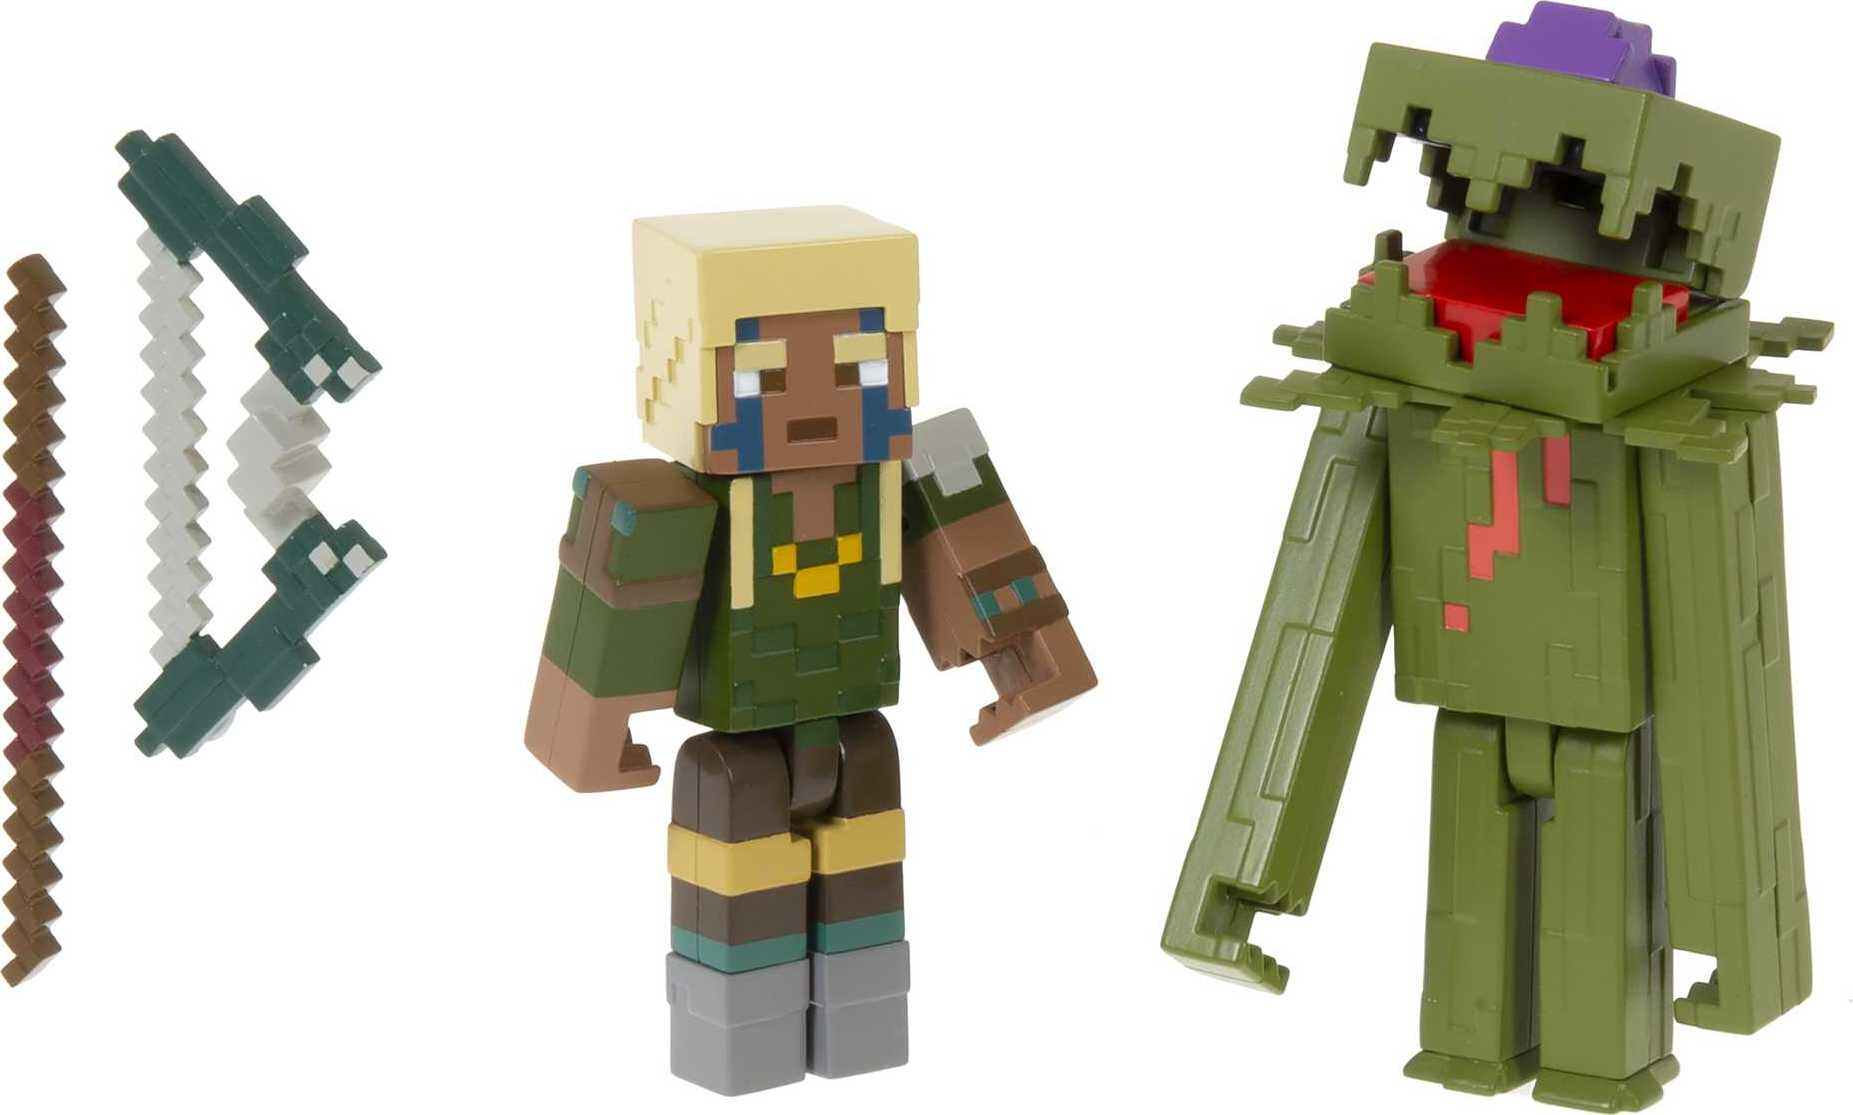 Minecraft Craft-a-Block 2-Pk Figures, Character Figures Based on